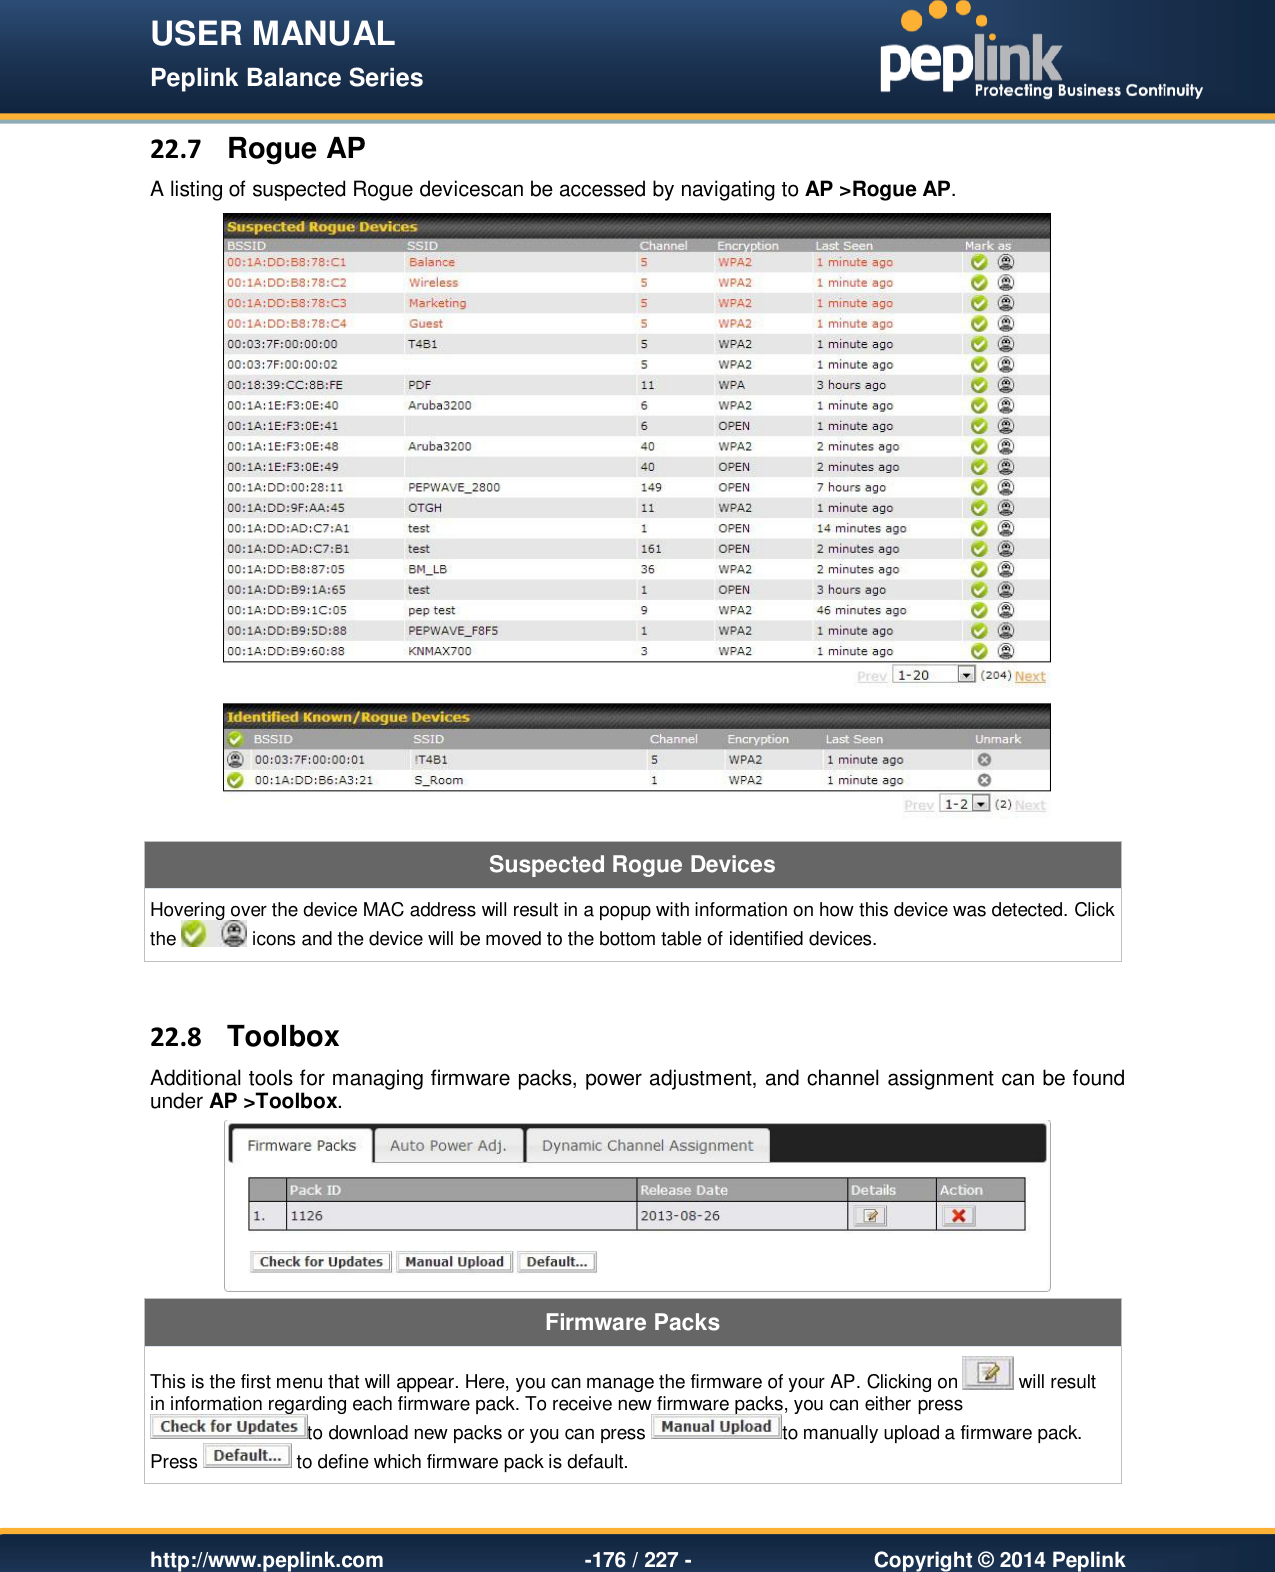 USER MANUAL Peplink Balance Series   http://www.peplink.com -176 / 227 -  Copyright © 2014 Peplink 22.7  Rogue AP A listing of suspected Rogue devicescan be accessed by navigating to AP &gt;Rogue AP.  Suspected Rogue Devices Hovering over the device MAC address will result in a popup with information on how this device was detected. Click the   icons and the device will be moved to the bottom table of identified devices.  22.8  Toolbox Additional tools for managing firmware packs, power adjustment, and channel assignment can be found under AP &gt;Toolbox.  Firmware Packs This is the first menu that will appear. Here, you can manage the firmware of your AP. Clicking on   will result in information regarding each firmware pack. To receive new firmware packs, you can either press to download new packs or you can press  to manually upload a firmware pack. Press   to define which firmware pack is default. 